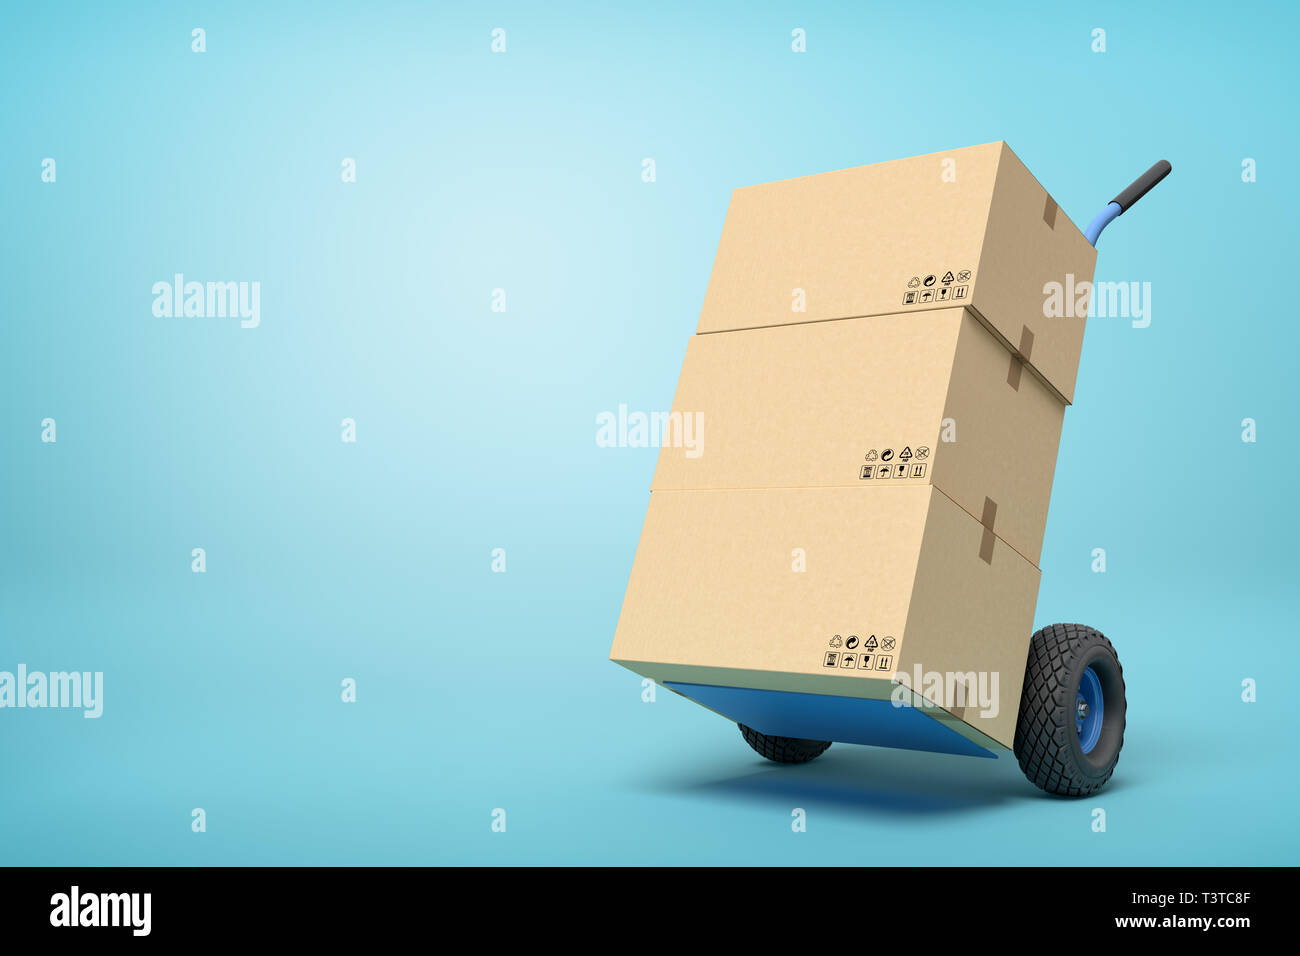 3d rendering of cardboard boxes on a hand truck on blue background Stock Photo